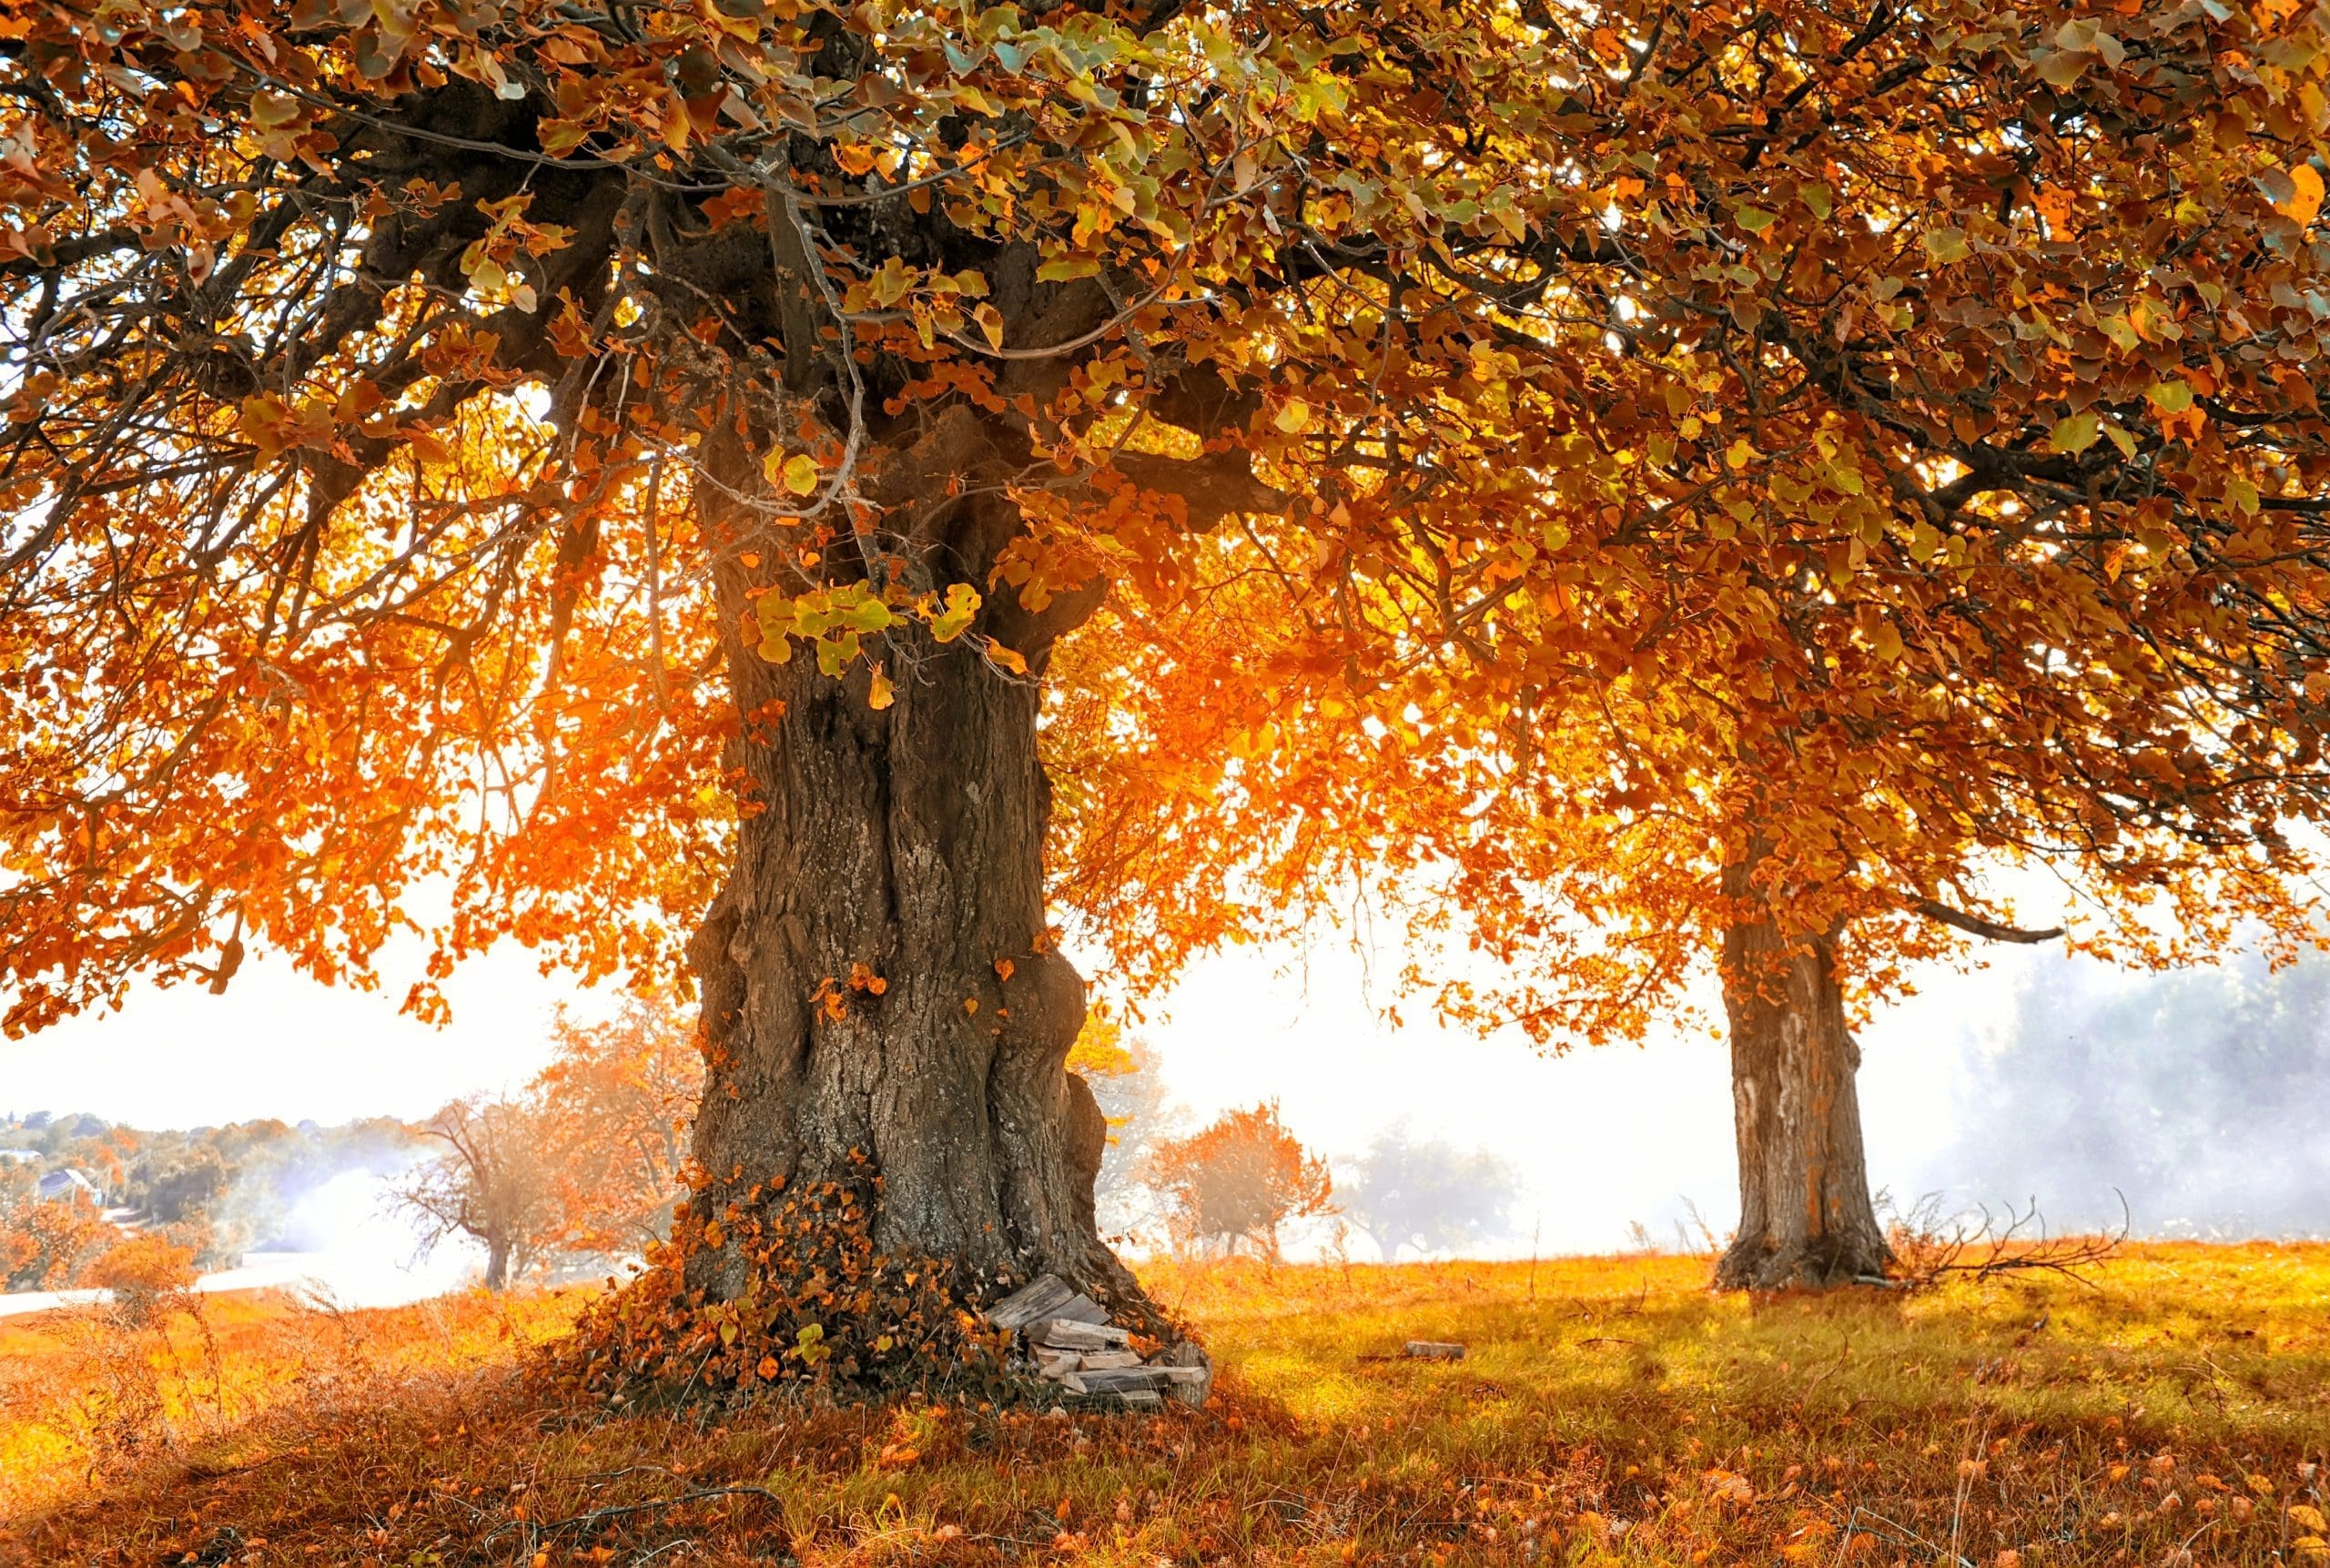 Autumn landscape with tree in sunlight